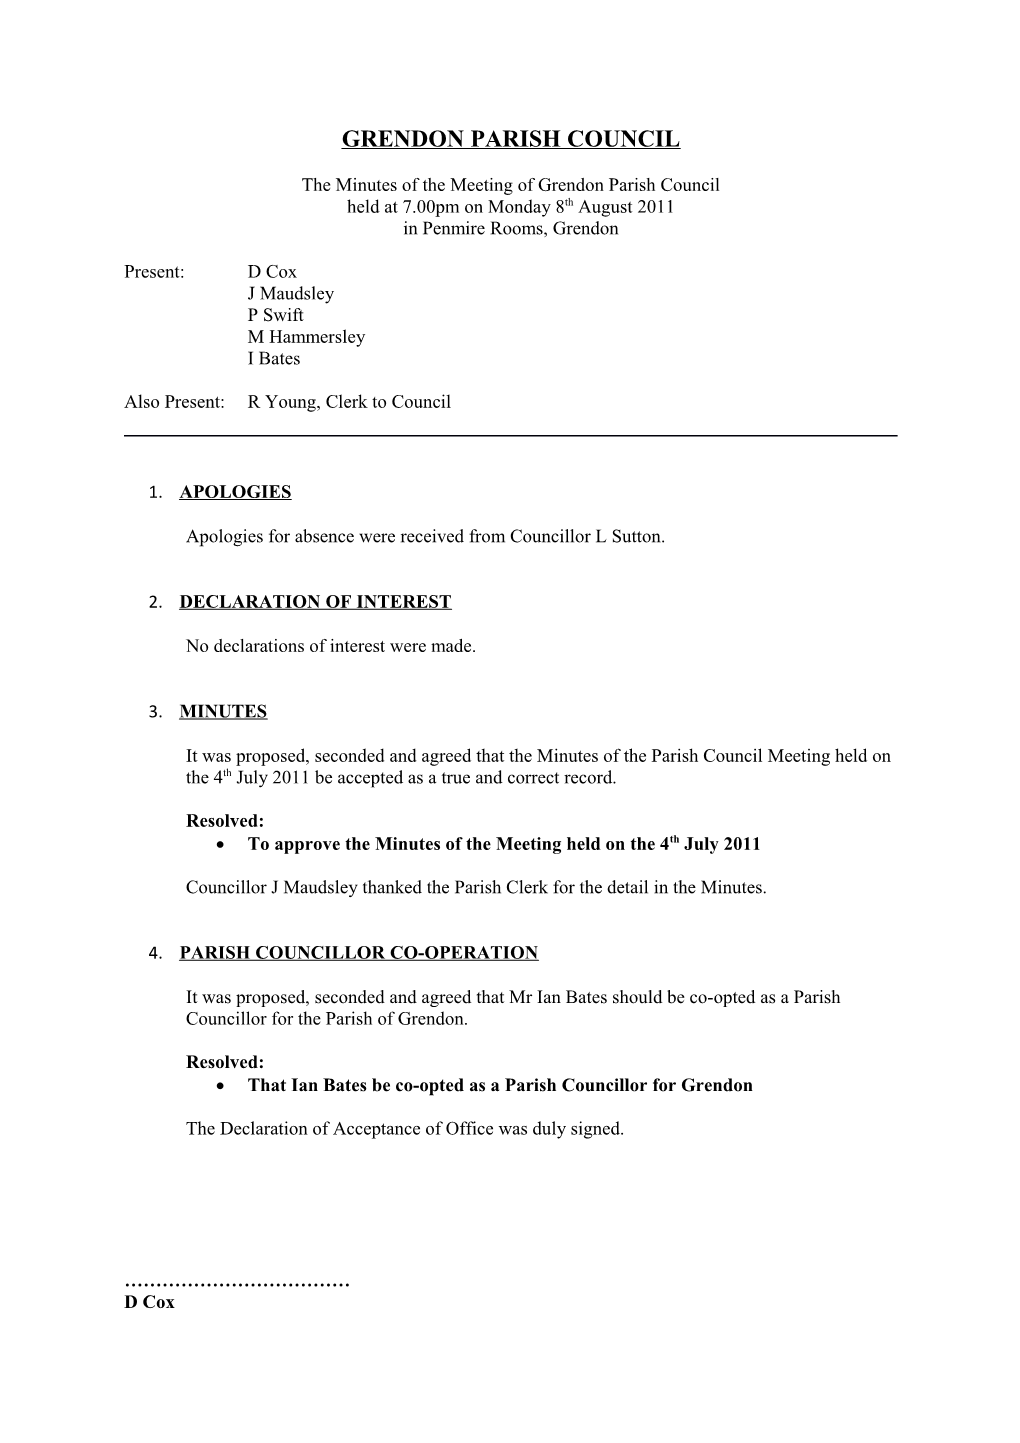 The Minutes of the Meeting of Grendon Parish Council